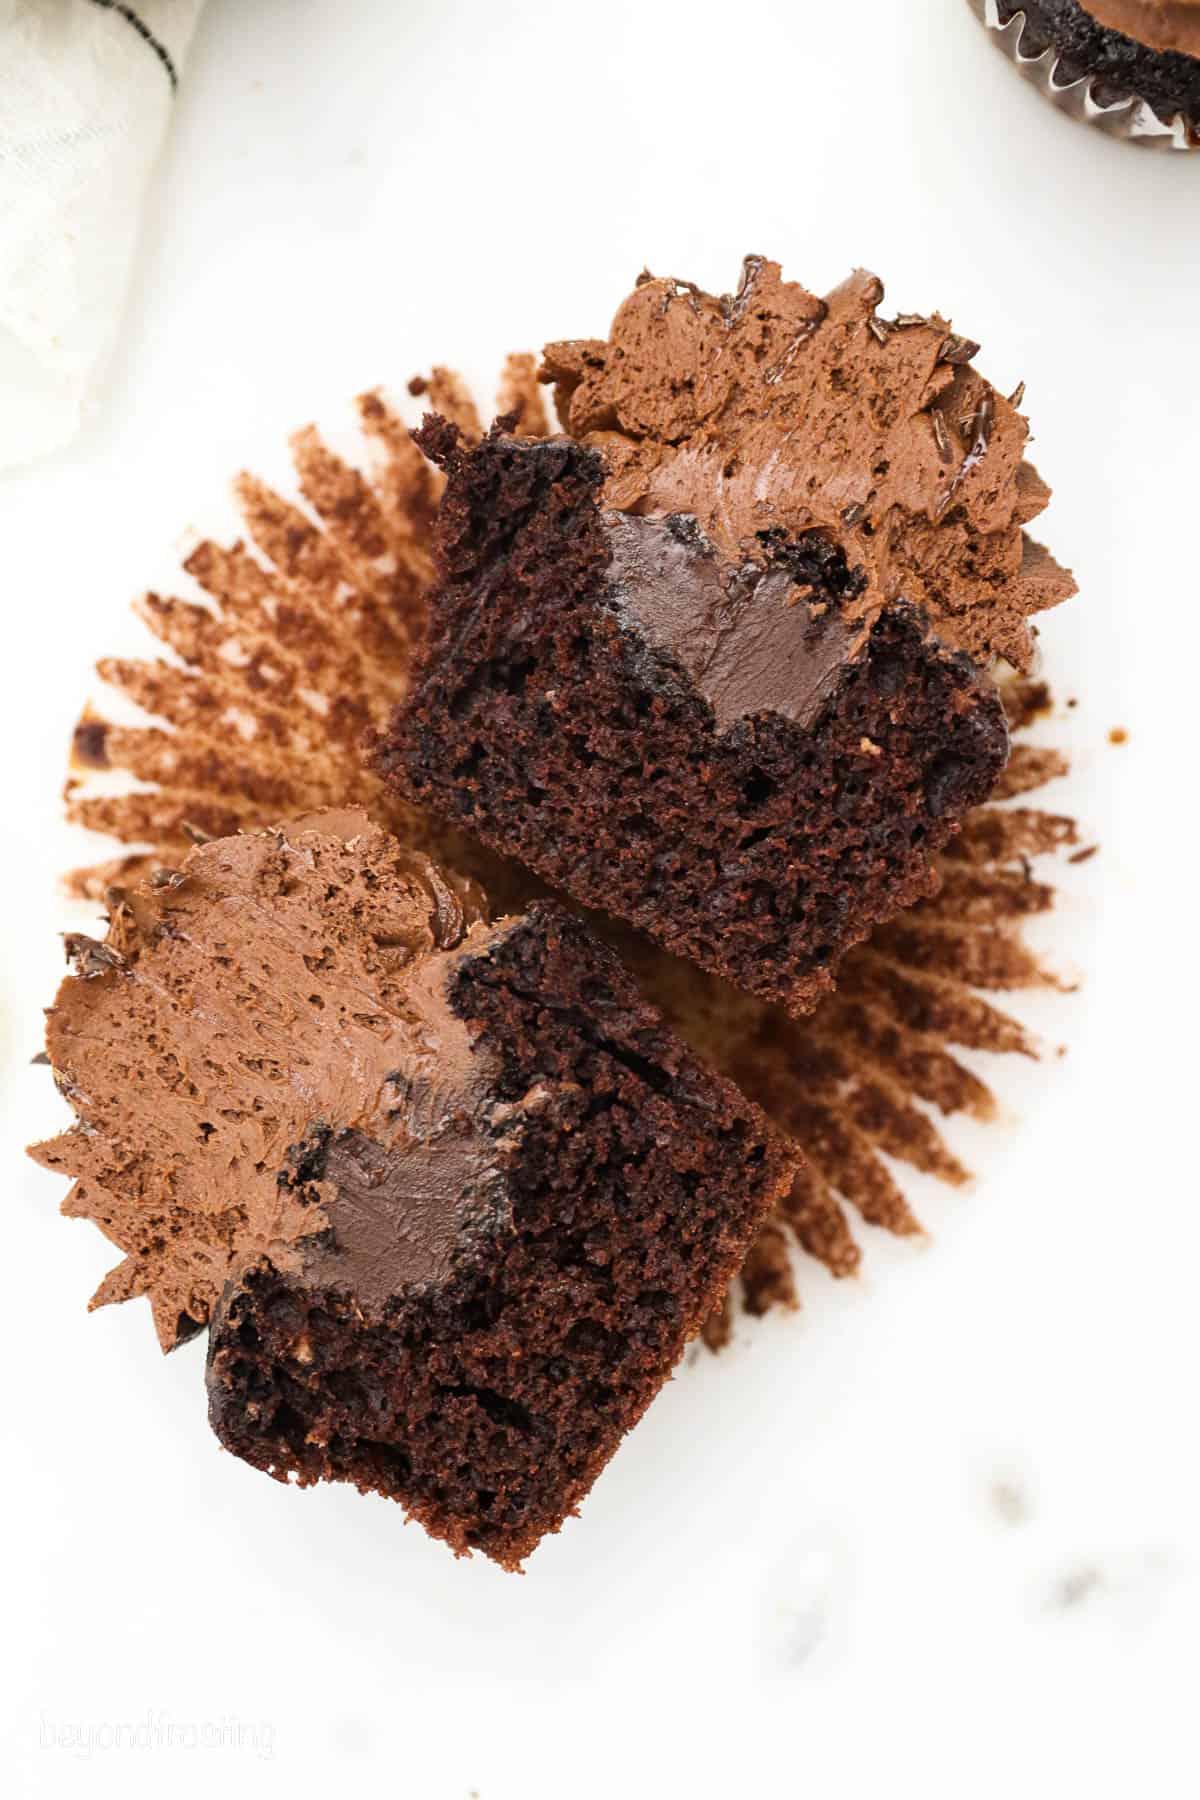 Overhead view of a frosted chocolate cupcake cut in half to reveal the ganache filling.